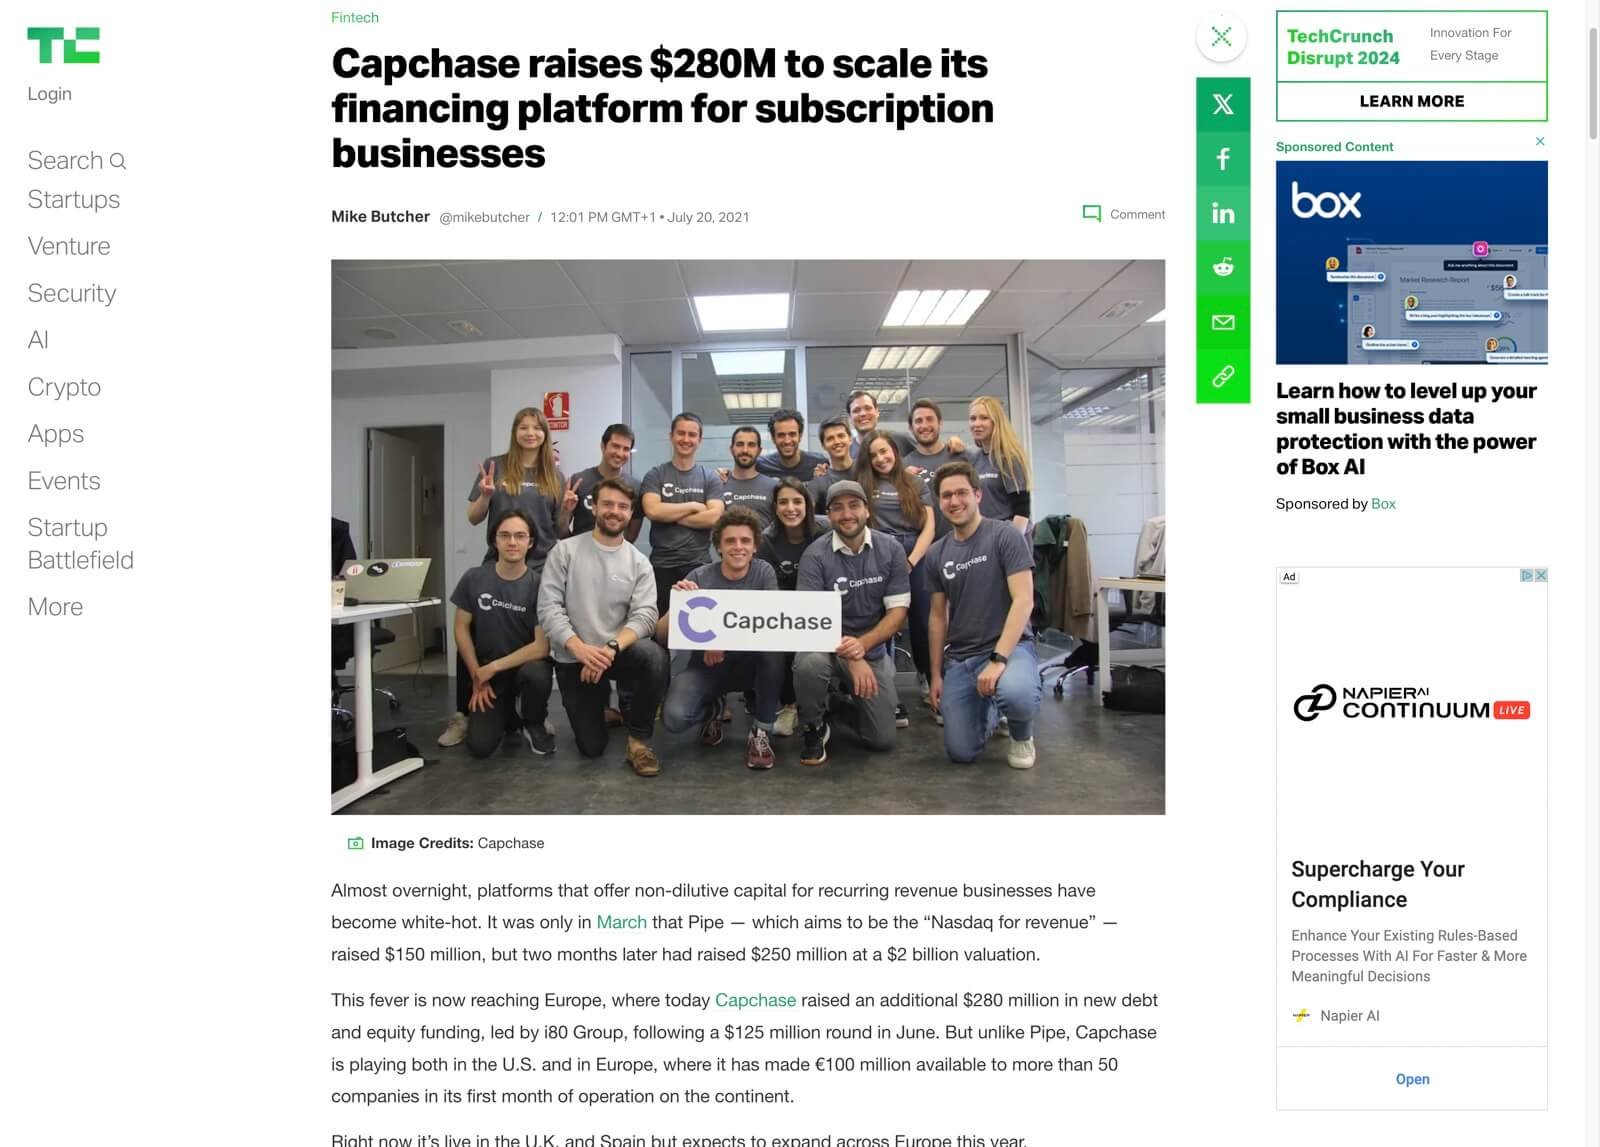 Techcrunch-Capchase-raises-280M-to-scale-its-financing-platform-for-subscription-businesses-TechCrunch.jpg